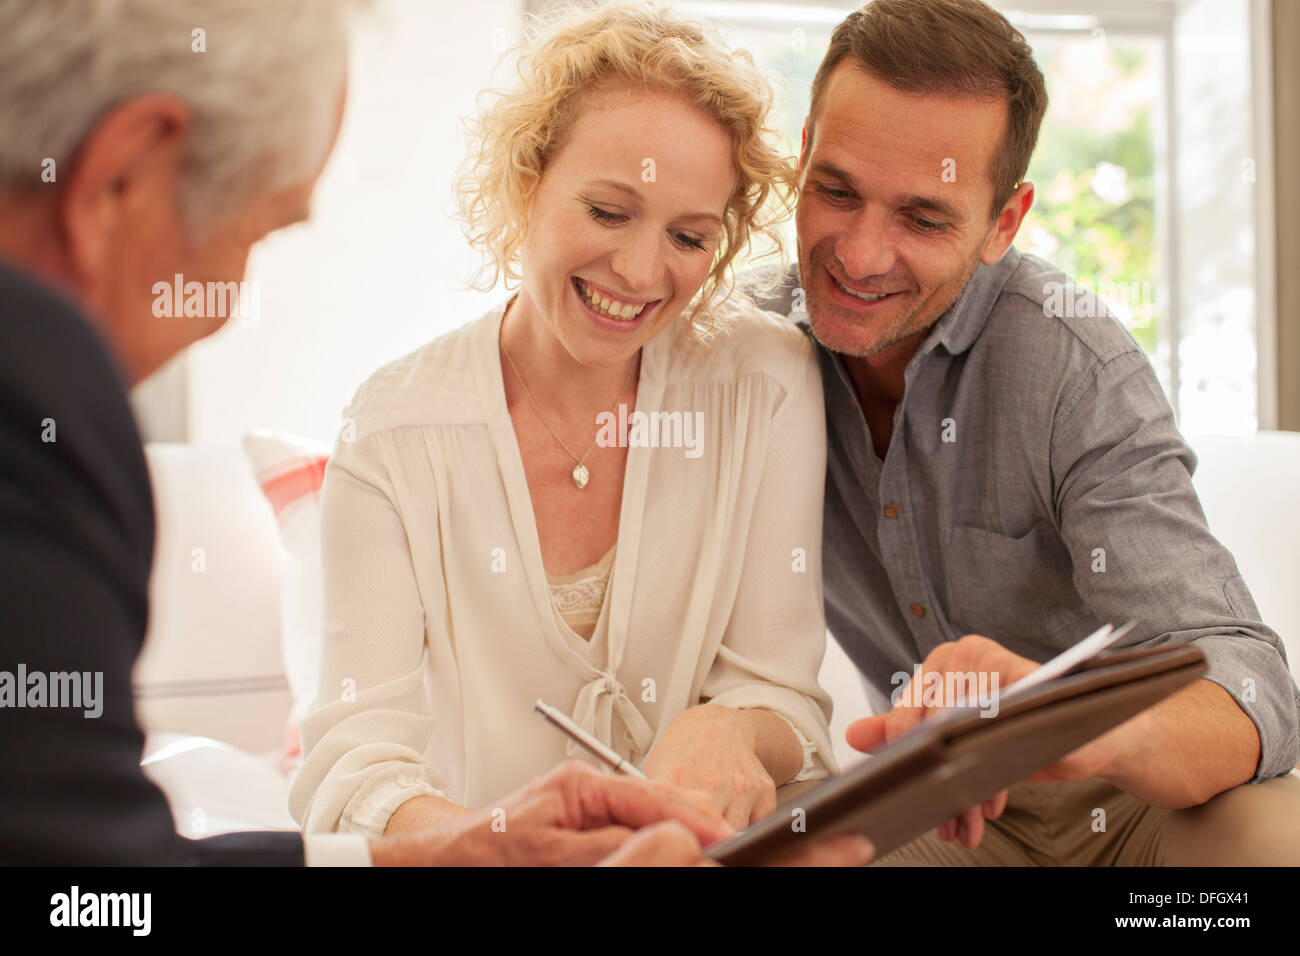 Financial advisor meeting with couple Stock Photo